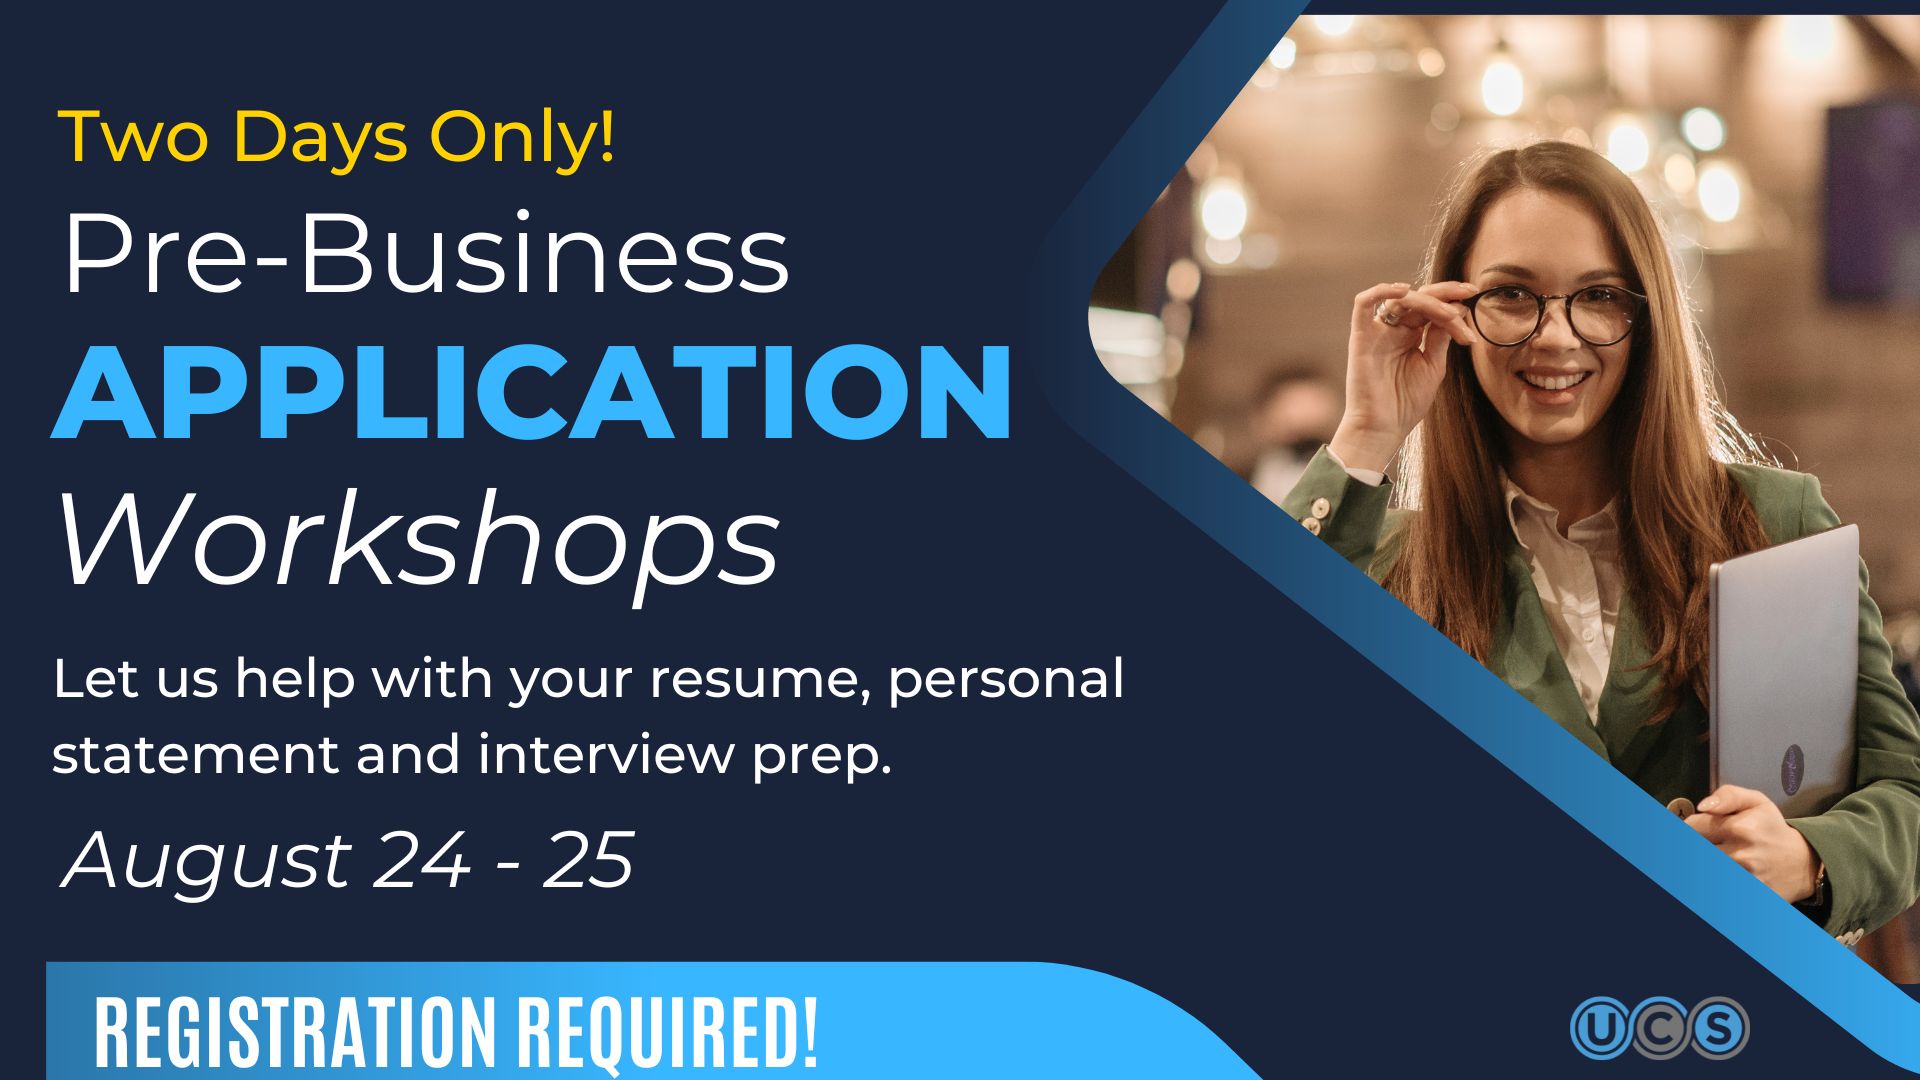 Workshops to help pre-business students with their application